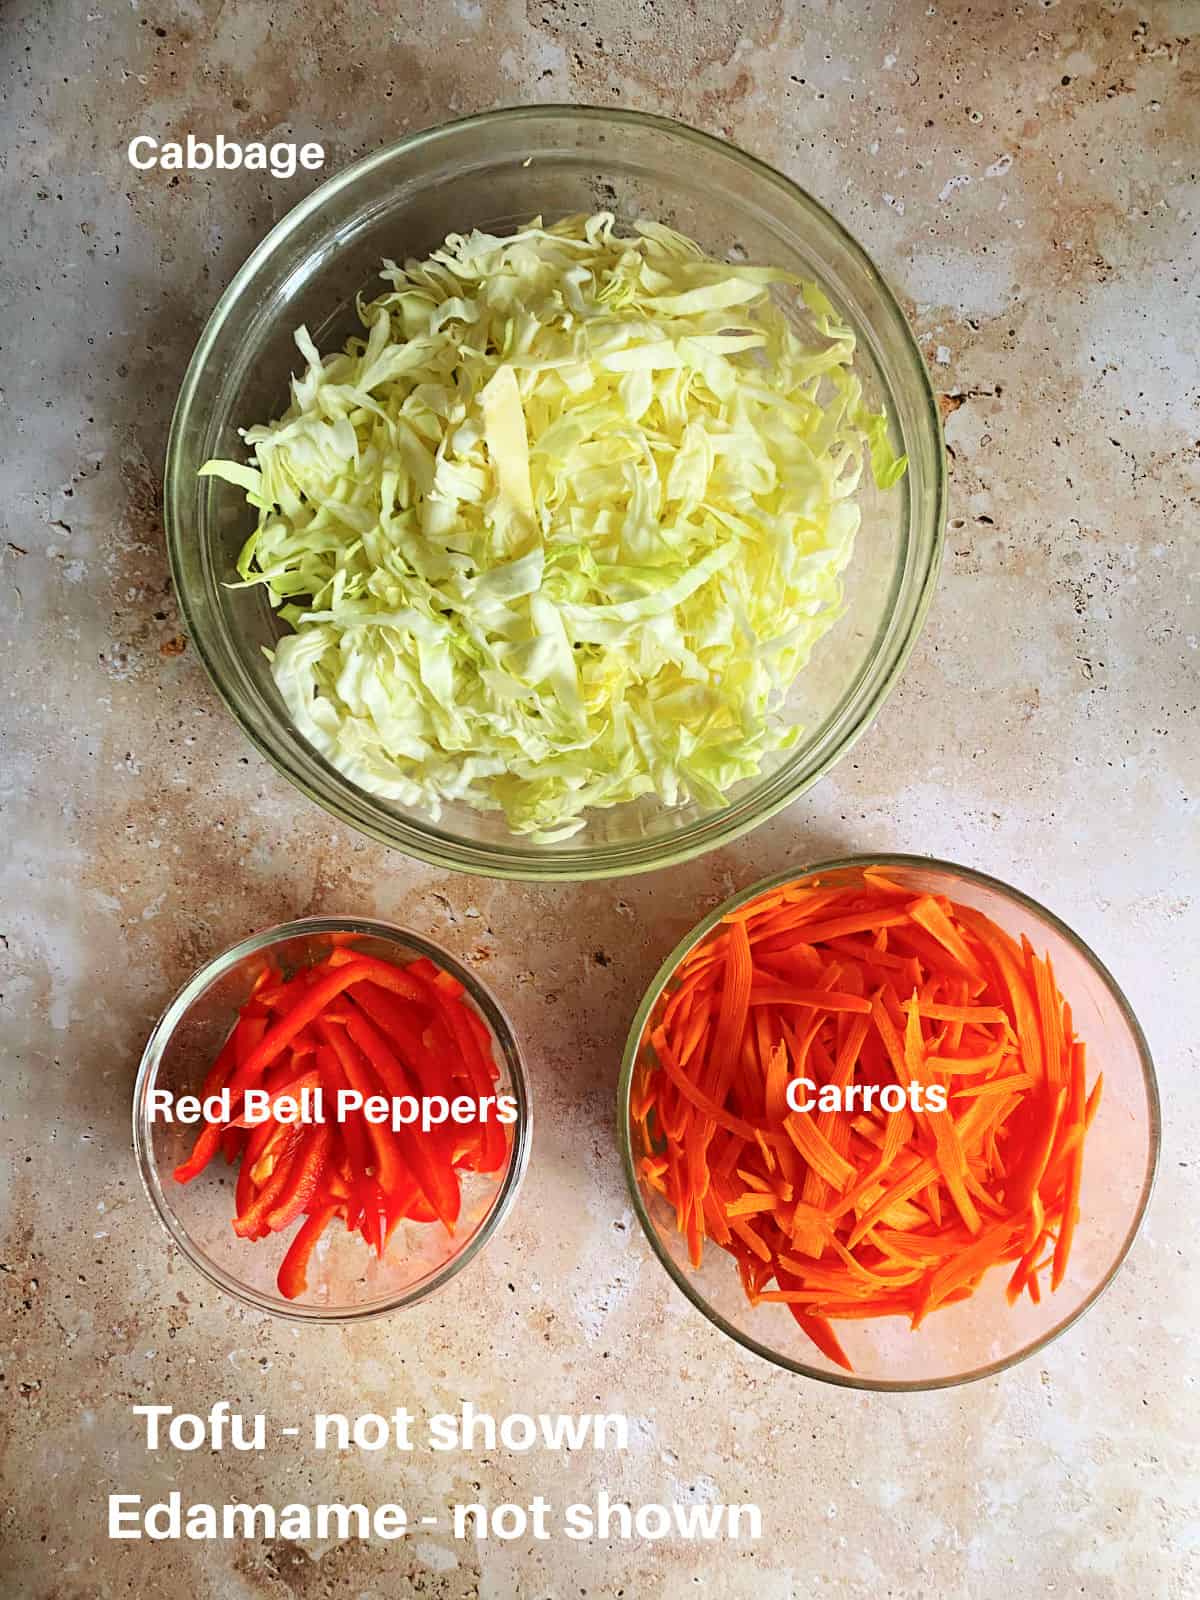 Ingredients to make cabbage stir fry in bowls. Cabbage, carrots, red bell peppers